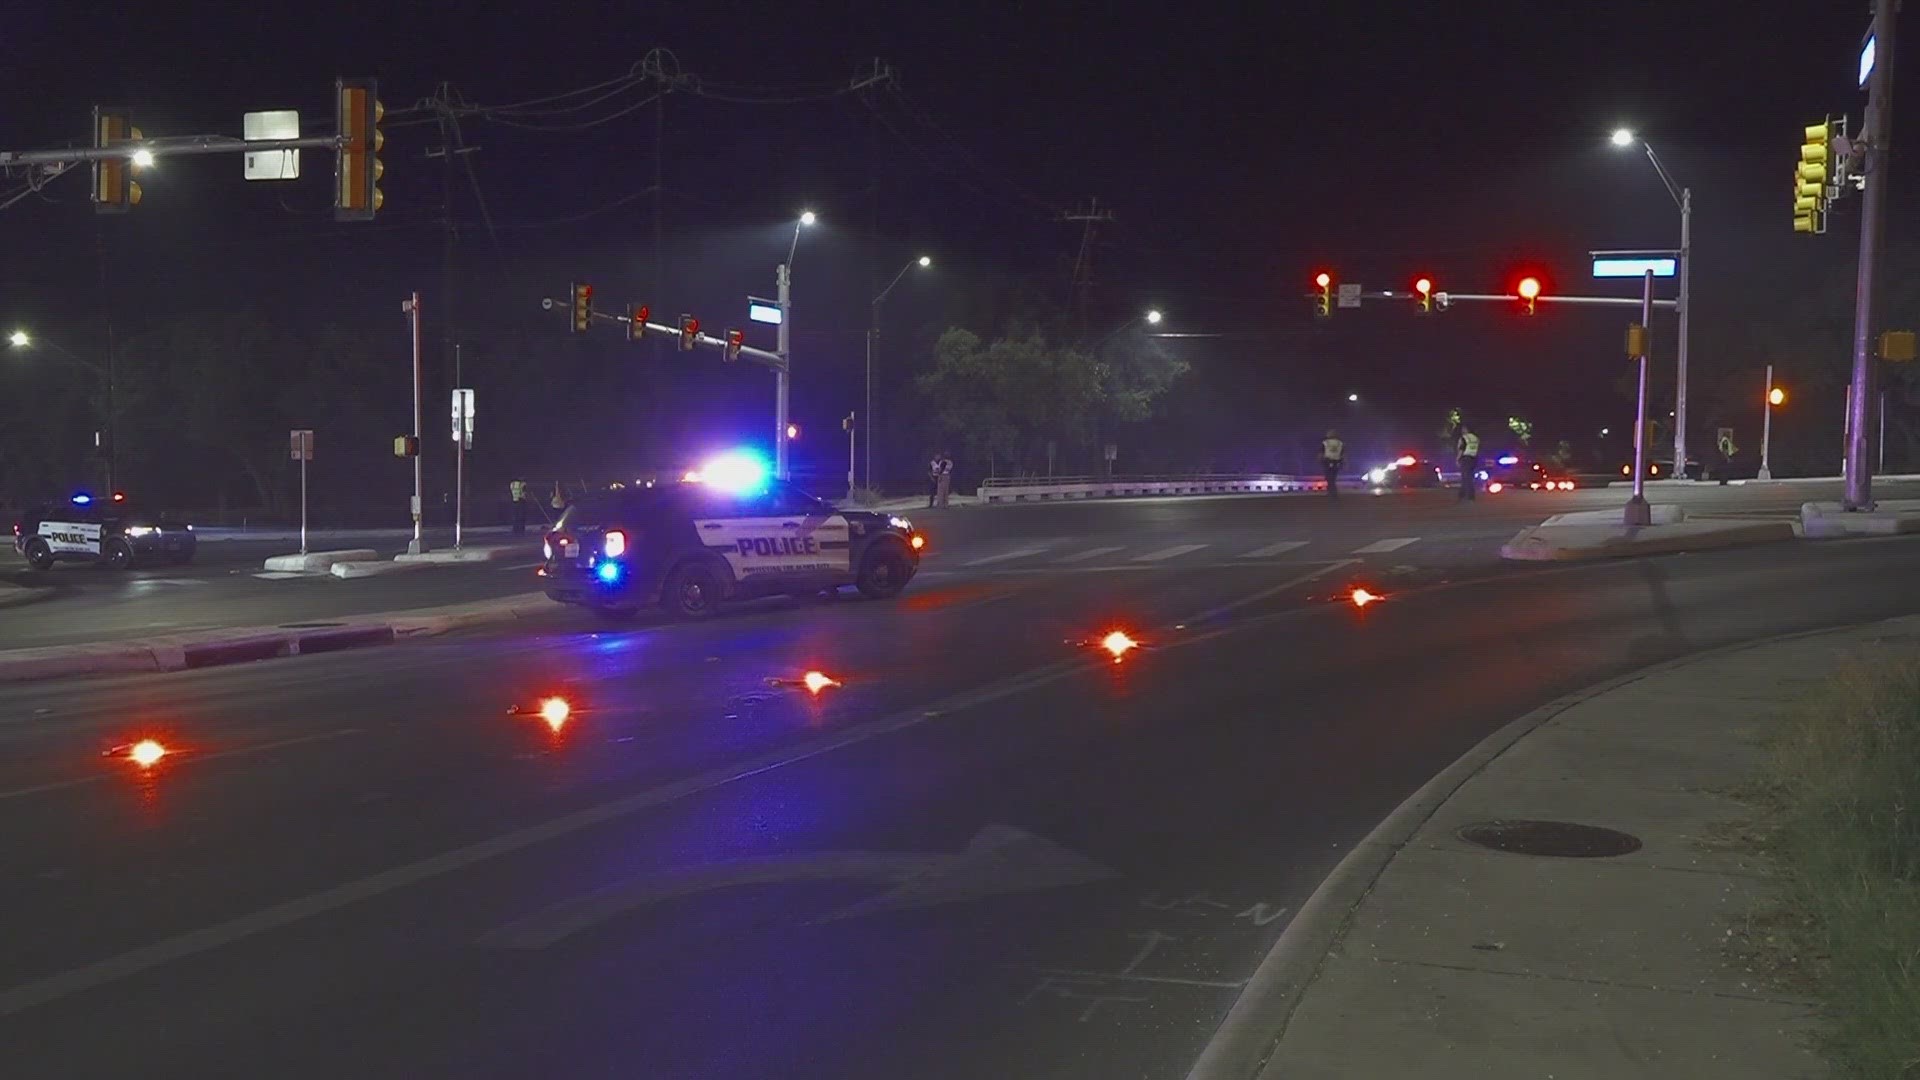 The man on the moped was turning at the intersection when he was struck and killed by a driver in an SUV who police suspect may have been drinking.